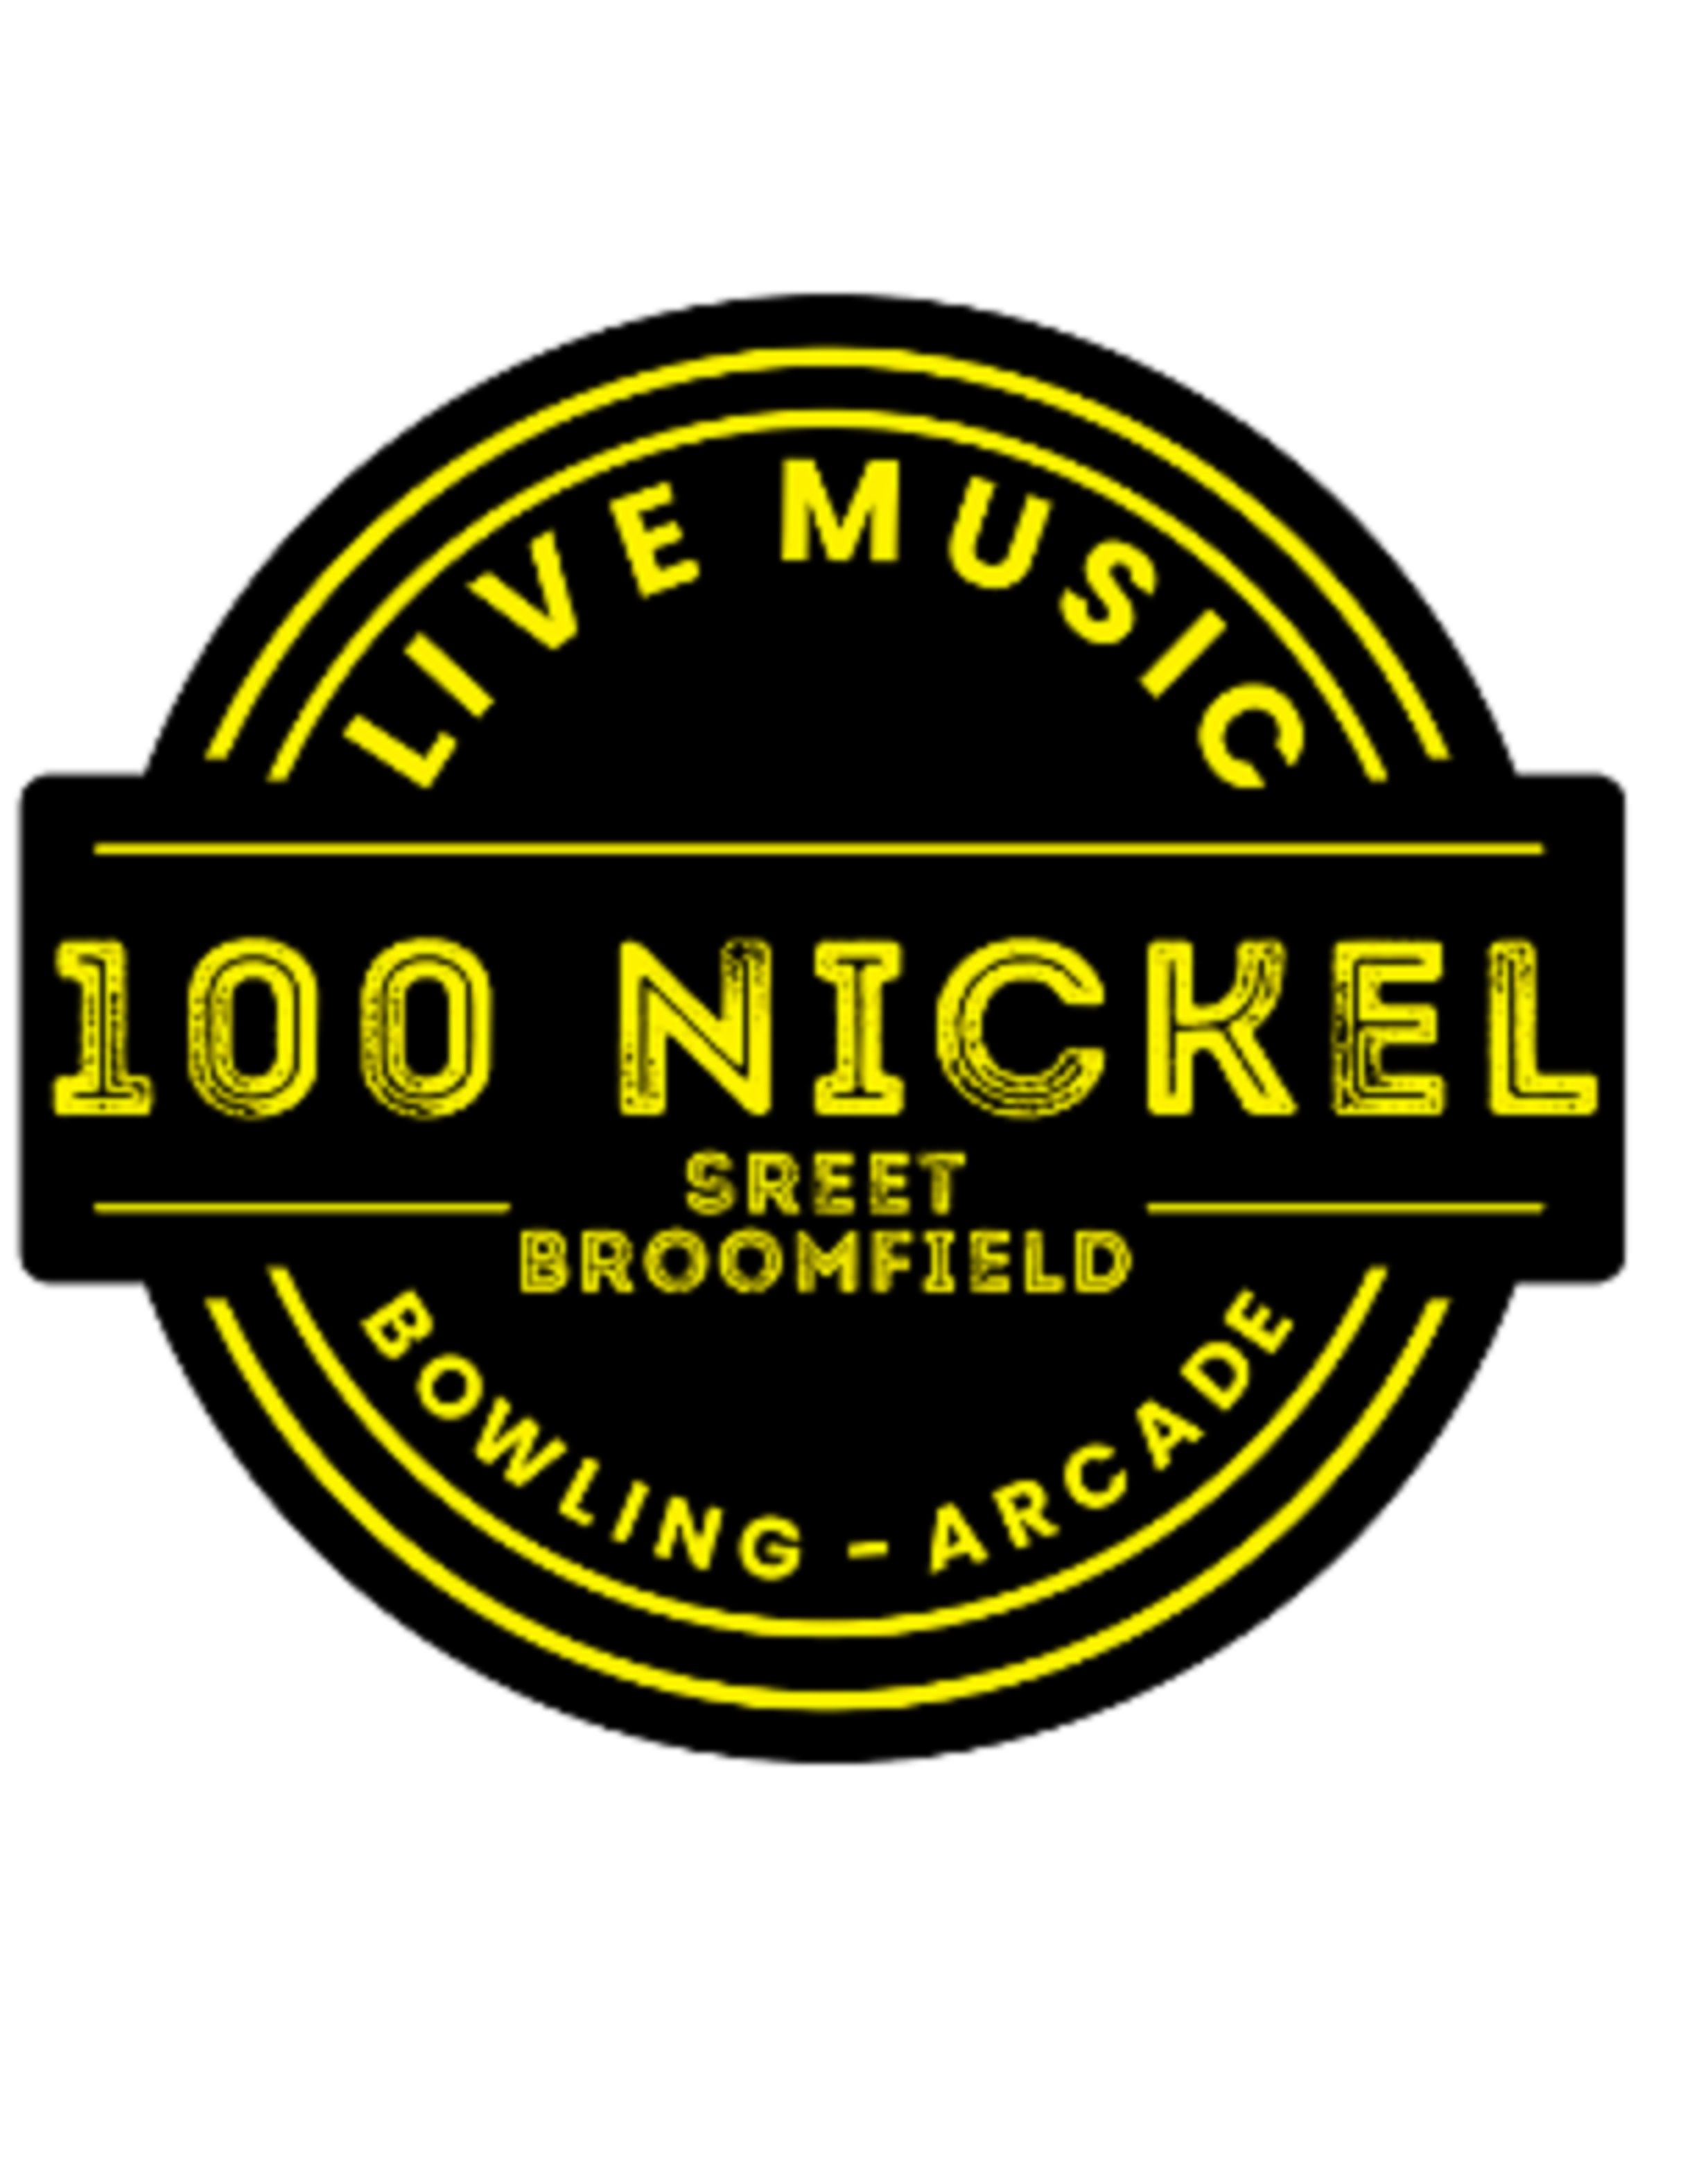 The Mishawaka and Chipper's Open New Music Venue at 100 Nickel in Broomfield